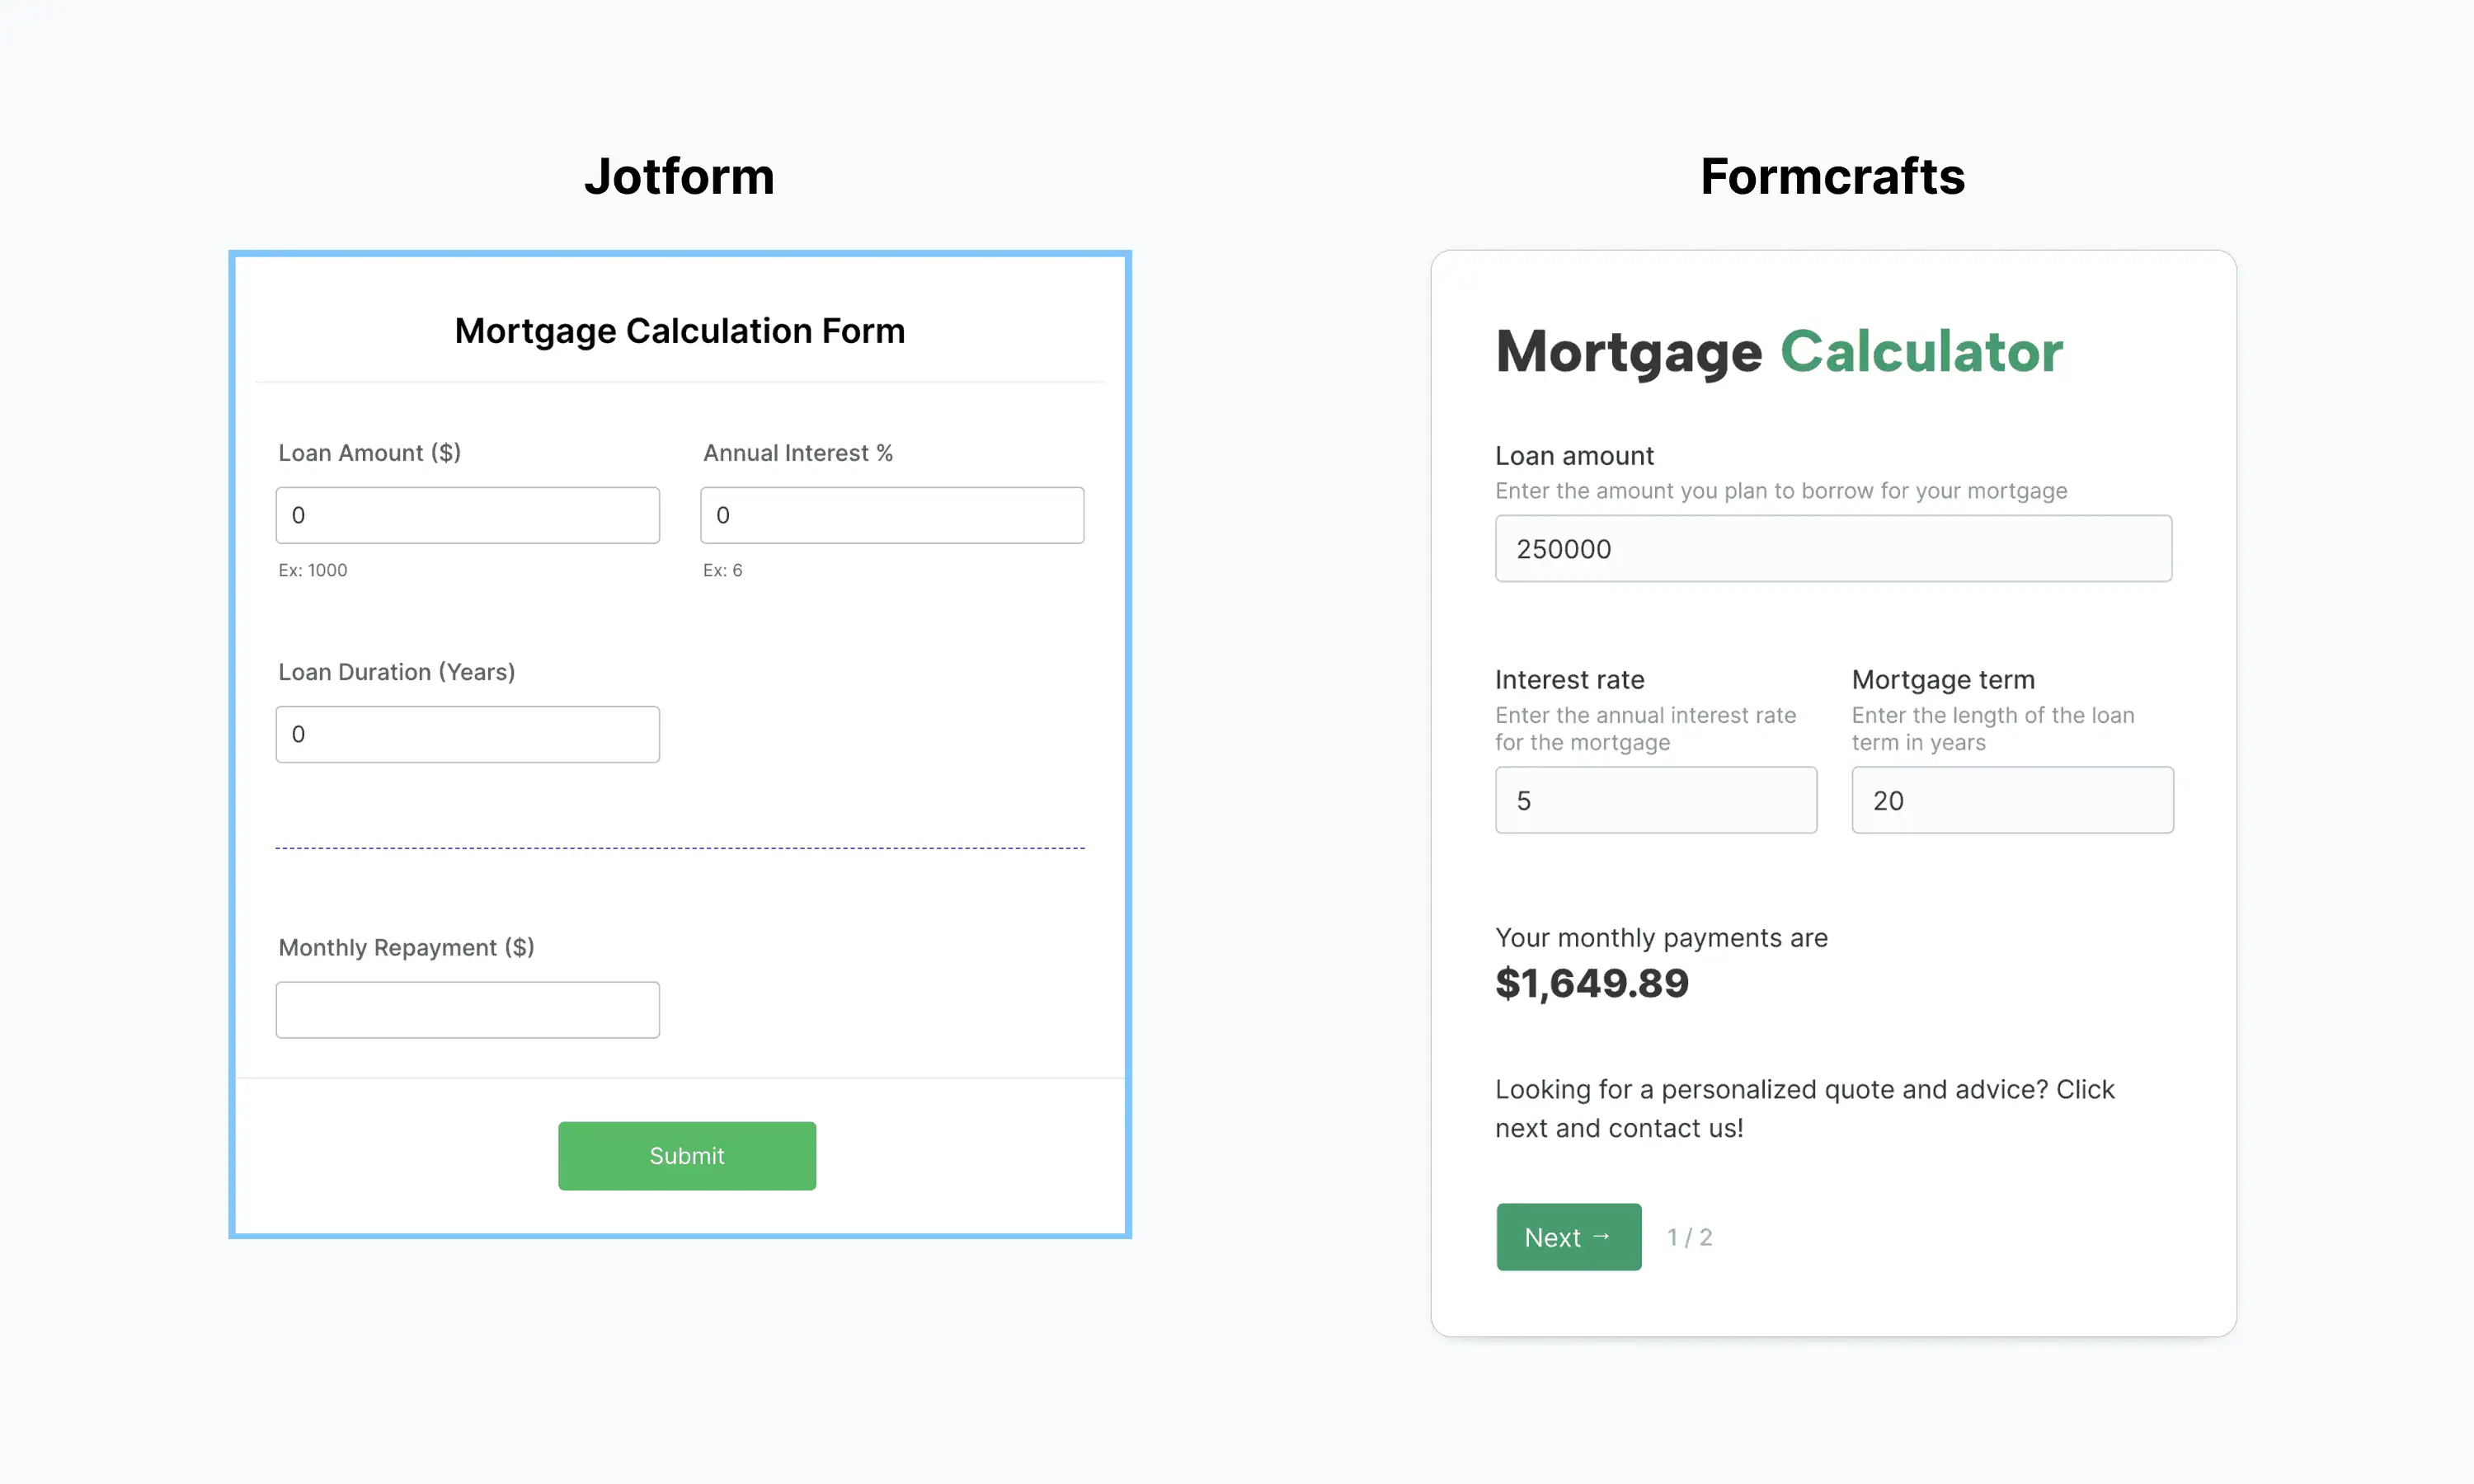 Mortgage calculation forms in Jotform and Formcrafts